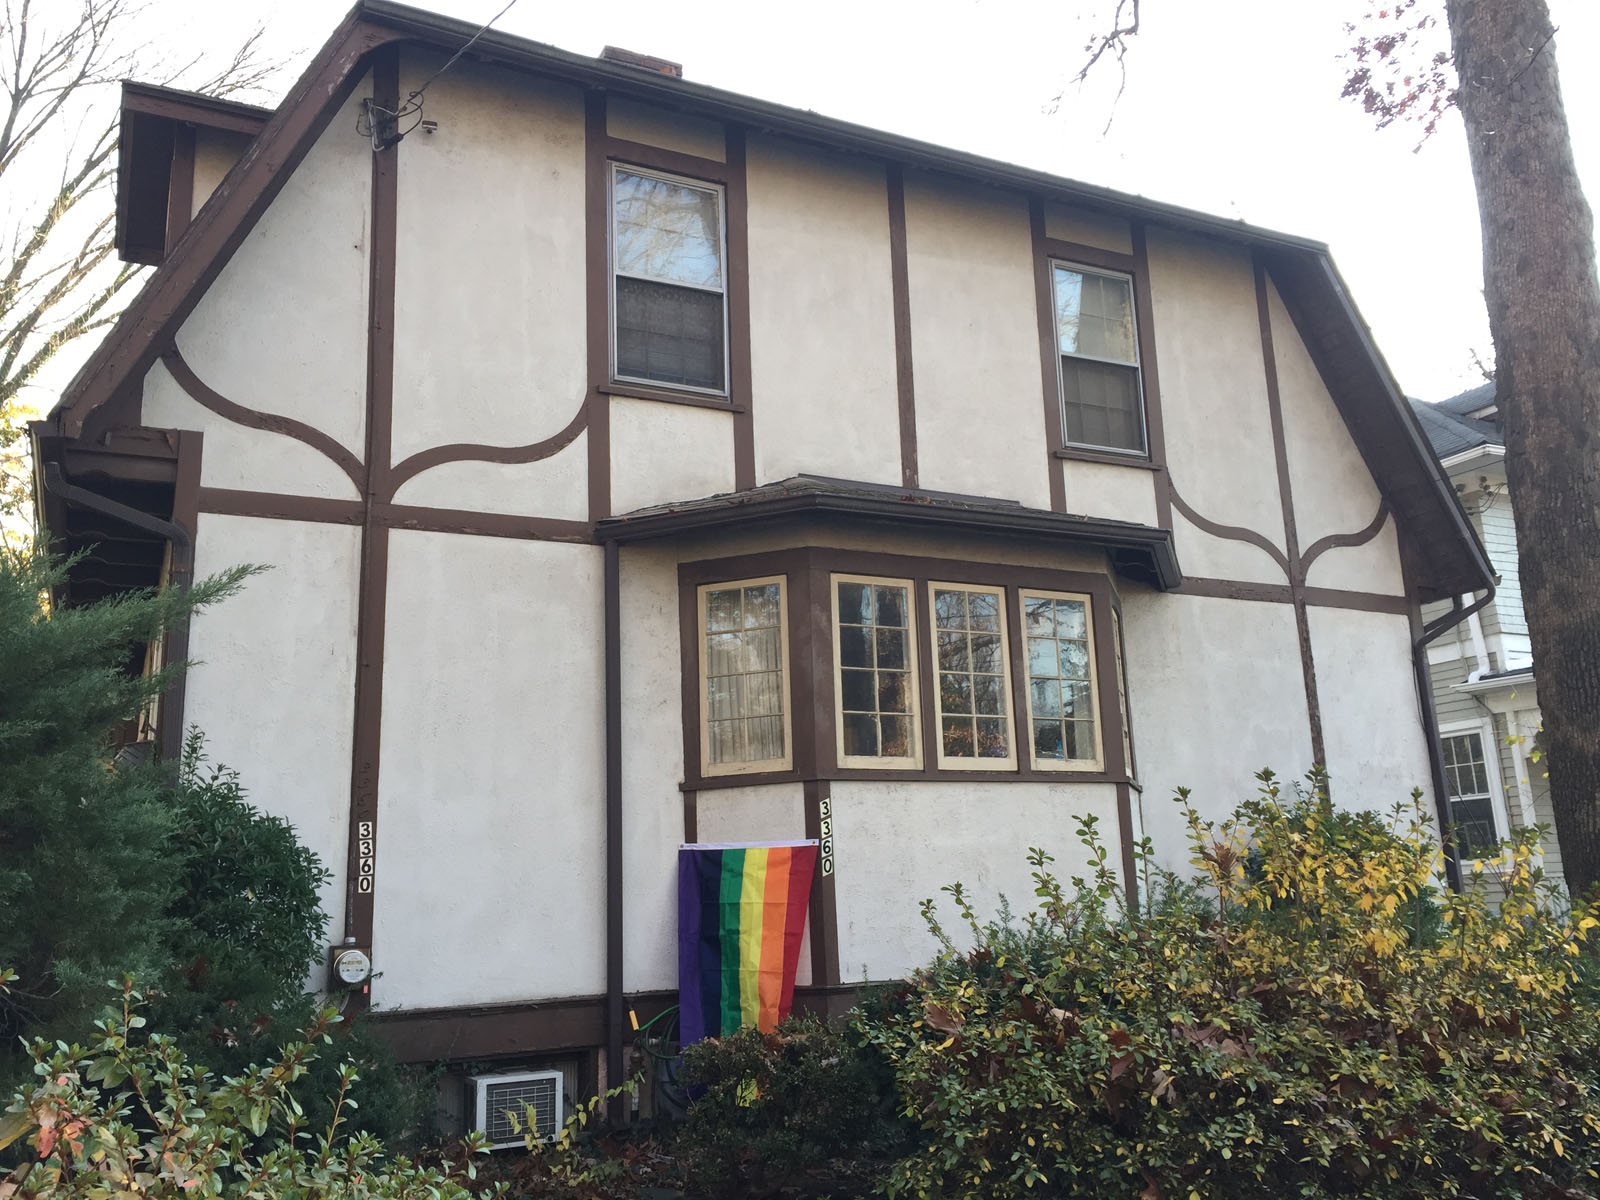 As of Friday, there were at lest nine rainbow flags flying at houses near Pence's temporary home. (WTOP/Michelle Basch)